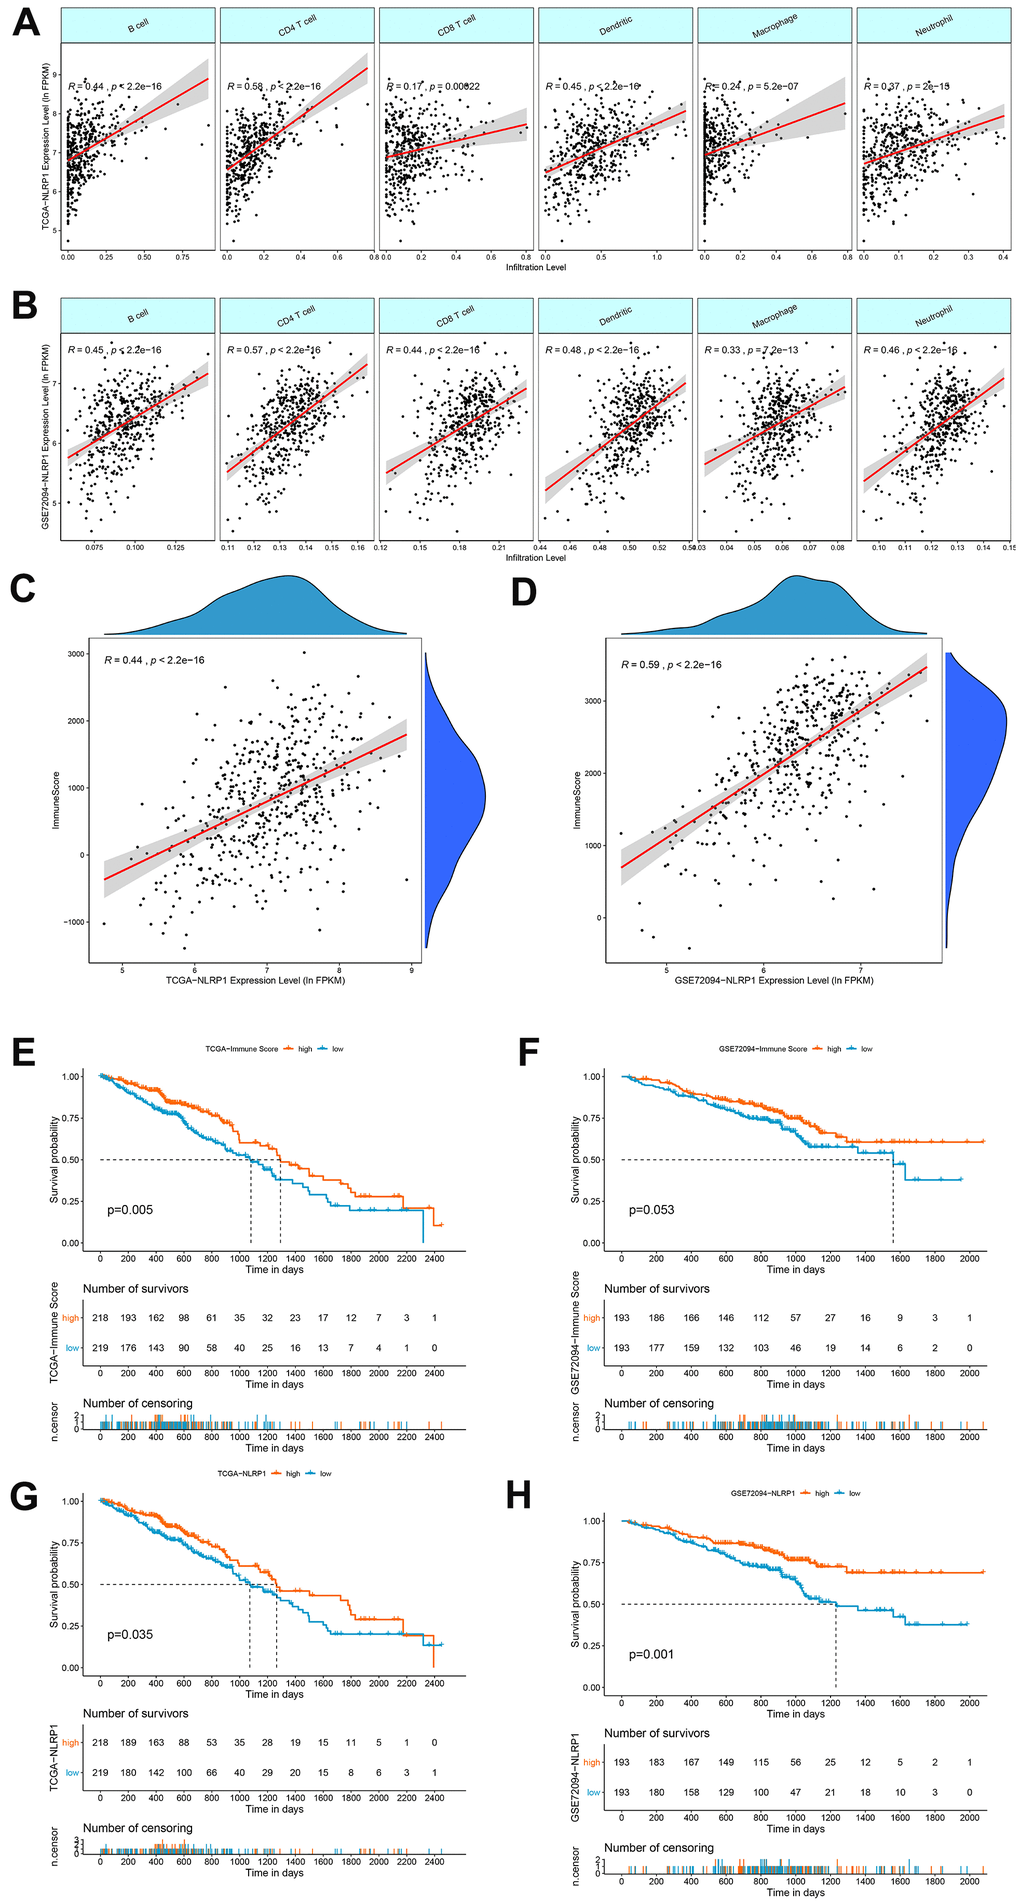 Correlations of NLRP1 expression with immune infiltration levels in LUAD. (A, B) The expression levels of NLRP1 in the TCGA-LUAD and GSE72094 datasets had significant positive correlations with the infiltration levels of B cells, CD4 T cells, CD8 T cells, dendritic cells, macrophages and neutrophils. (C, D) The expression of NLRP1 had a significant positive correlation with the immune score of LUAD samples based on the ESTIMATE algorithm in the TCGA-LUAD and GSE72094 datasets. (E, F) Kaplan-Meier survival curve analysis showed that patients with a higher immune score had longer overall survival time than those with a lower immune score in the TCGA-LUAD and GSE72094 datasets. (G, H) Kaplan-Meier survival curve analysis showed that patients with a higher NLRP1 expression level had longer overall survival time than those with a low expression level in the TCGA-LUAD and GSE72094 datasets.